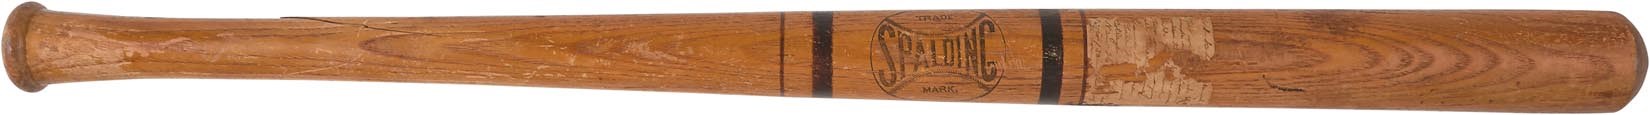 Early Baseball - 1880s Spalding Bat w/Earliest Known Use of the Term Memorabilia (Samuel M. Chase Collection)